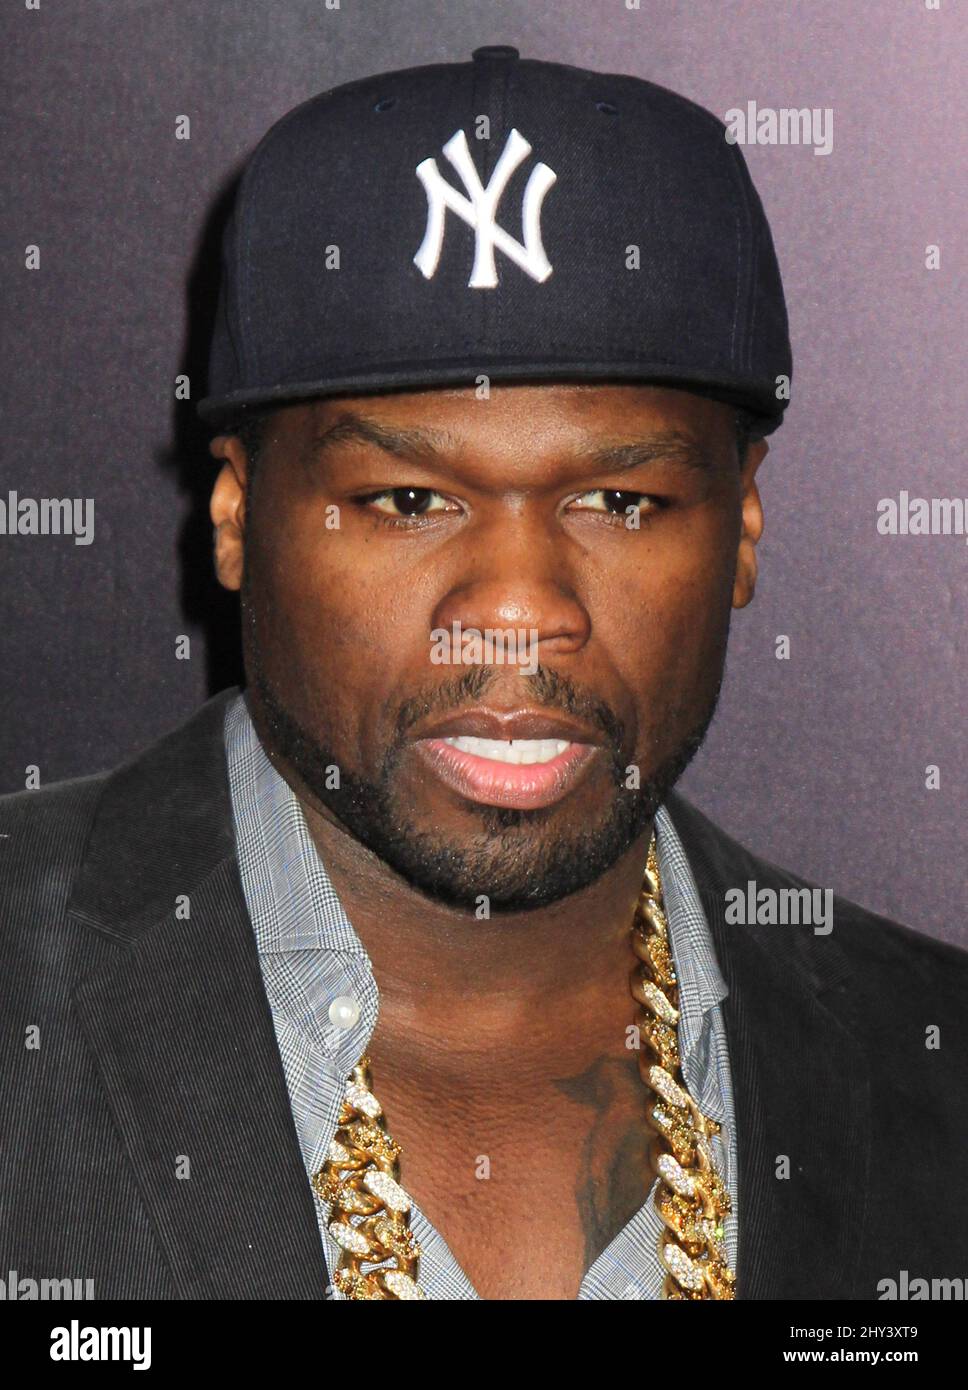 50 Cent attending the premiere of 